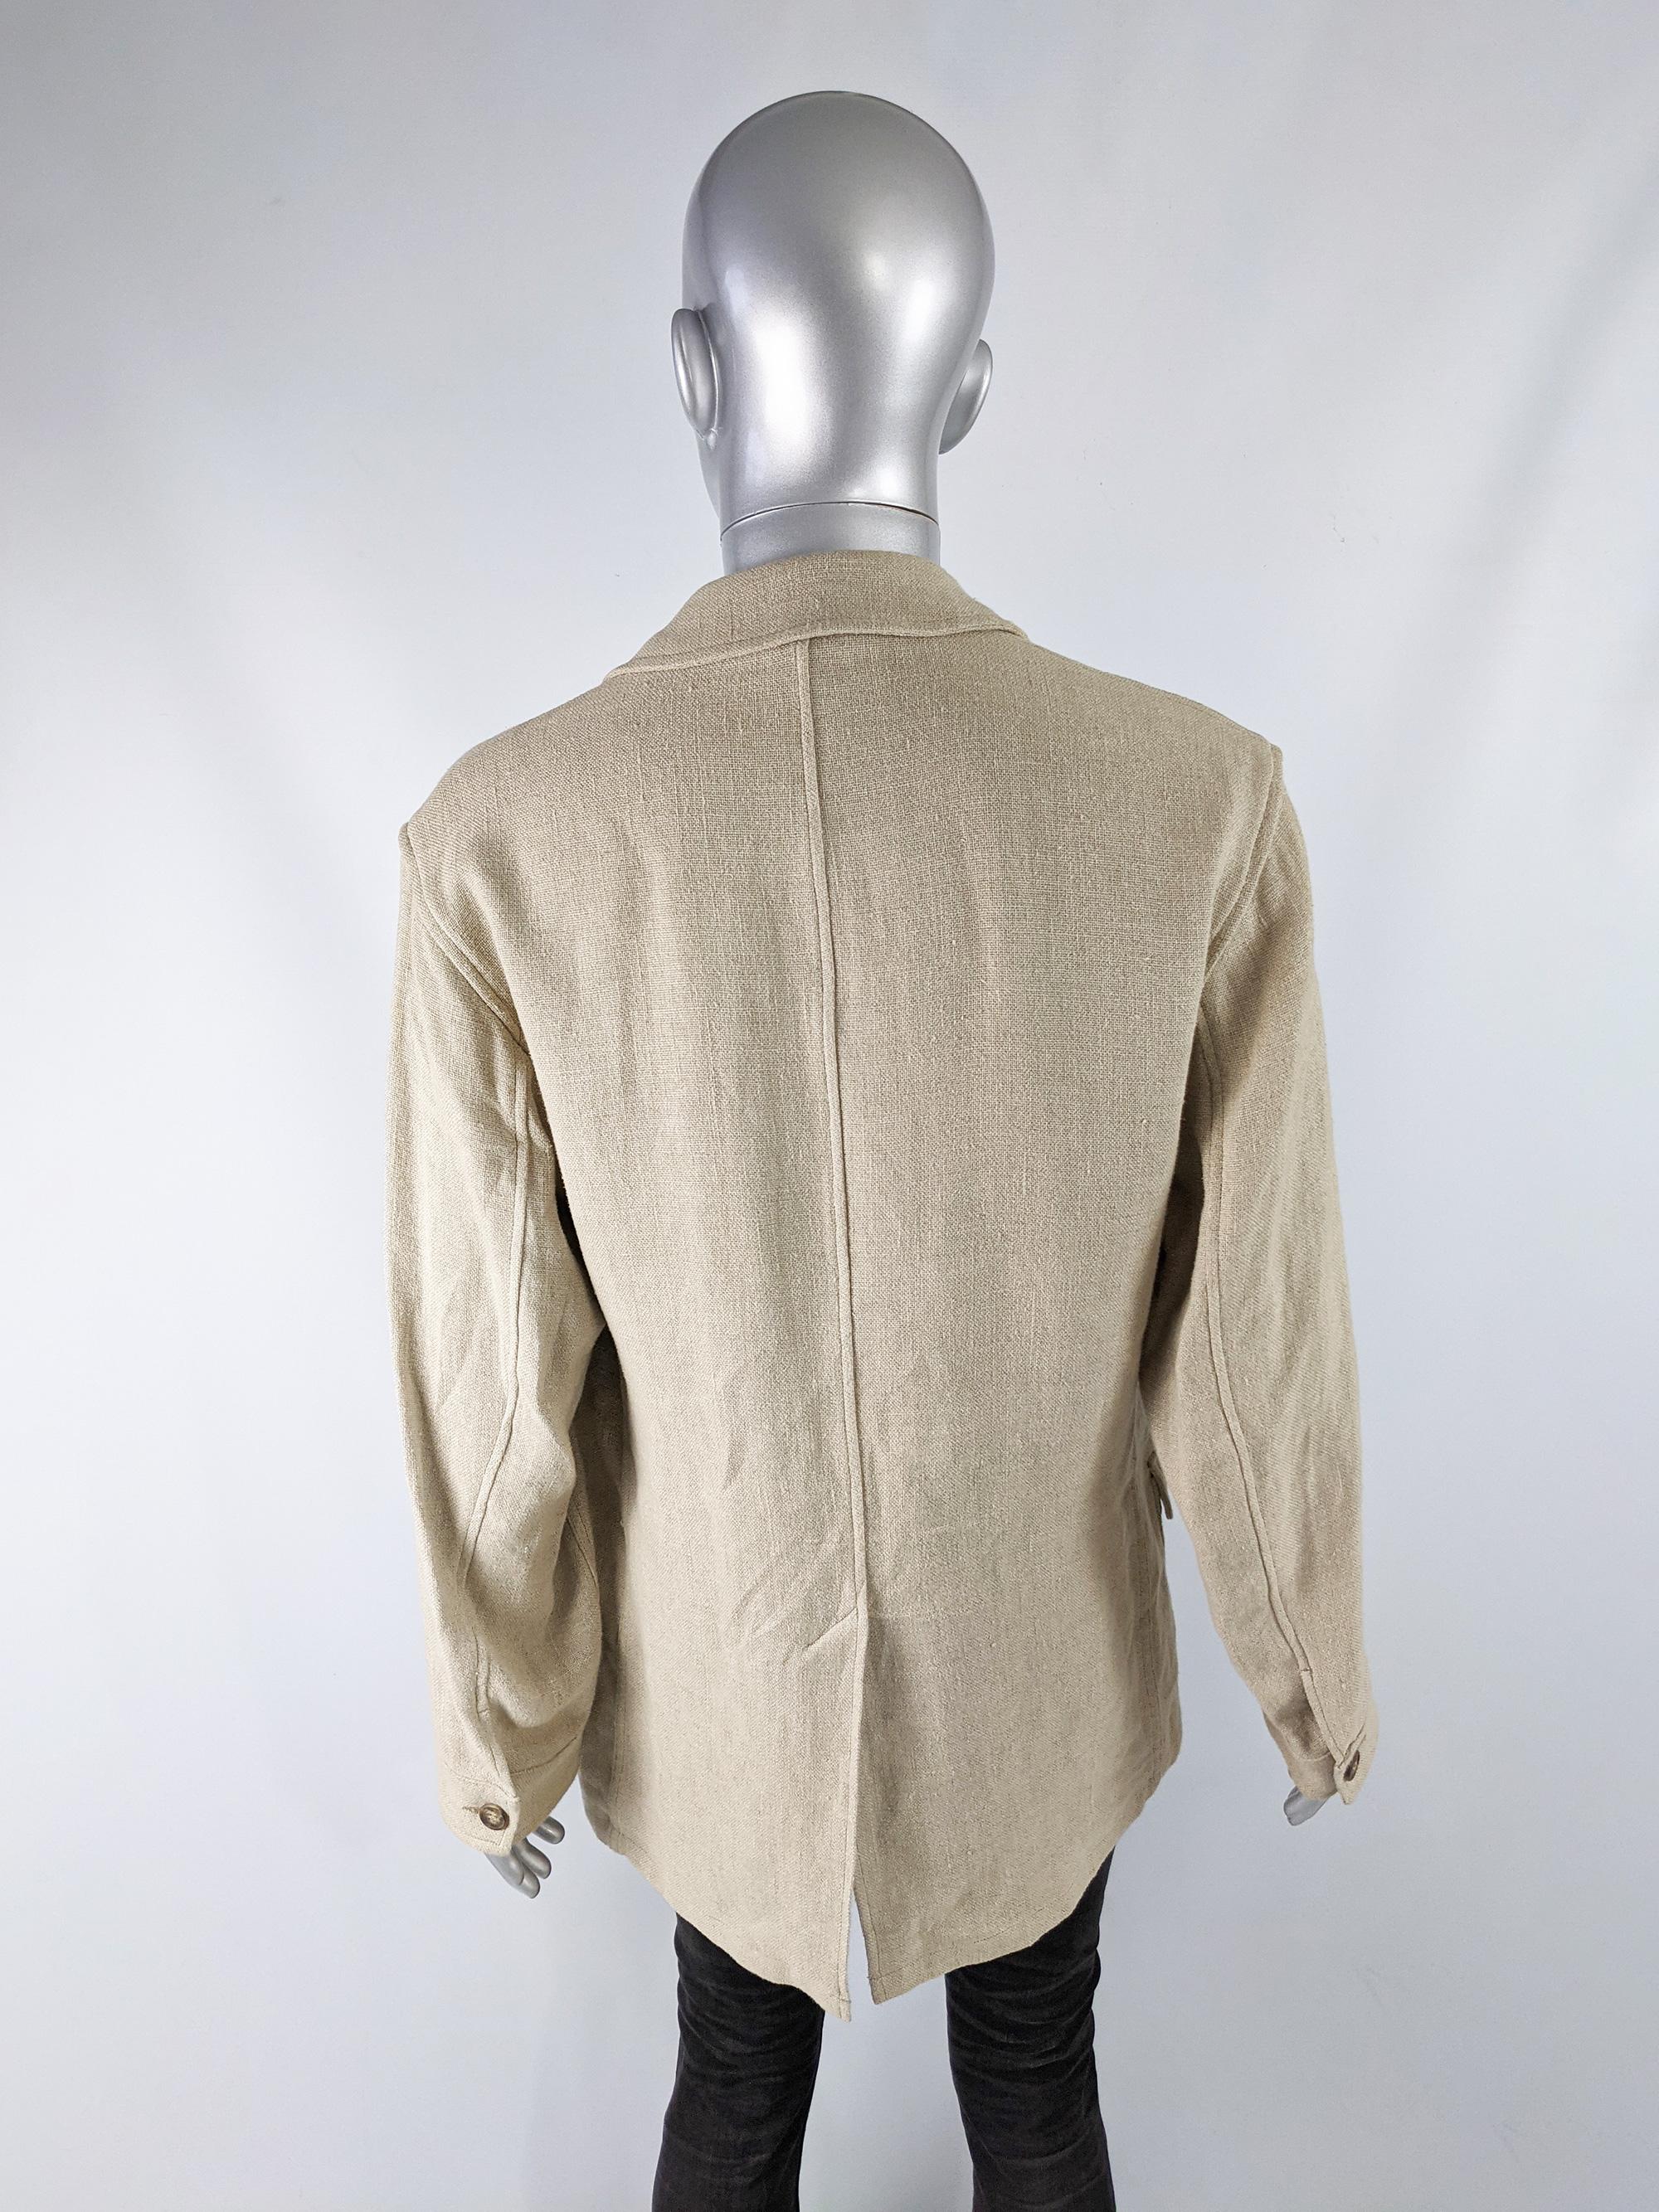 Kenzo Vintage Mens Linen Jacket In Excellent Condition In Doncaster, South Yorkshire